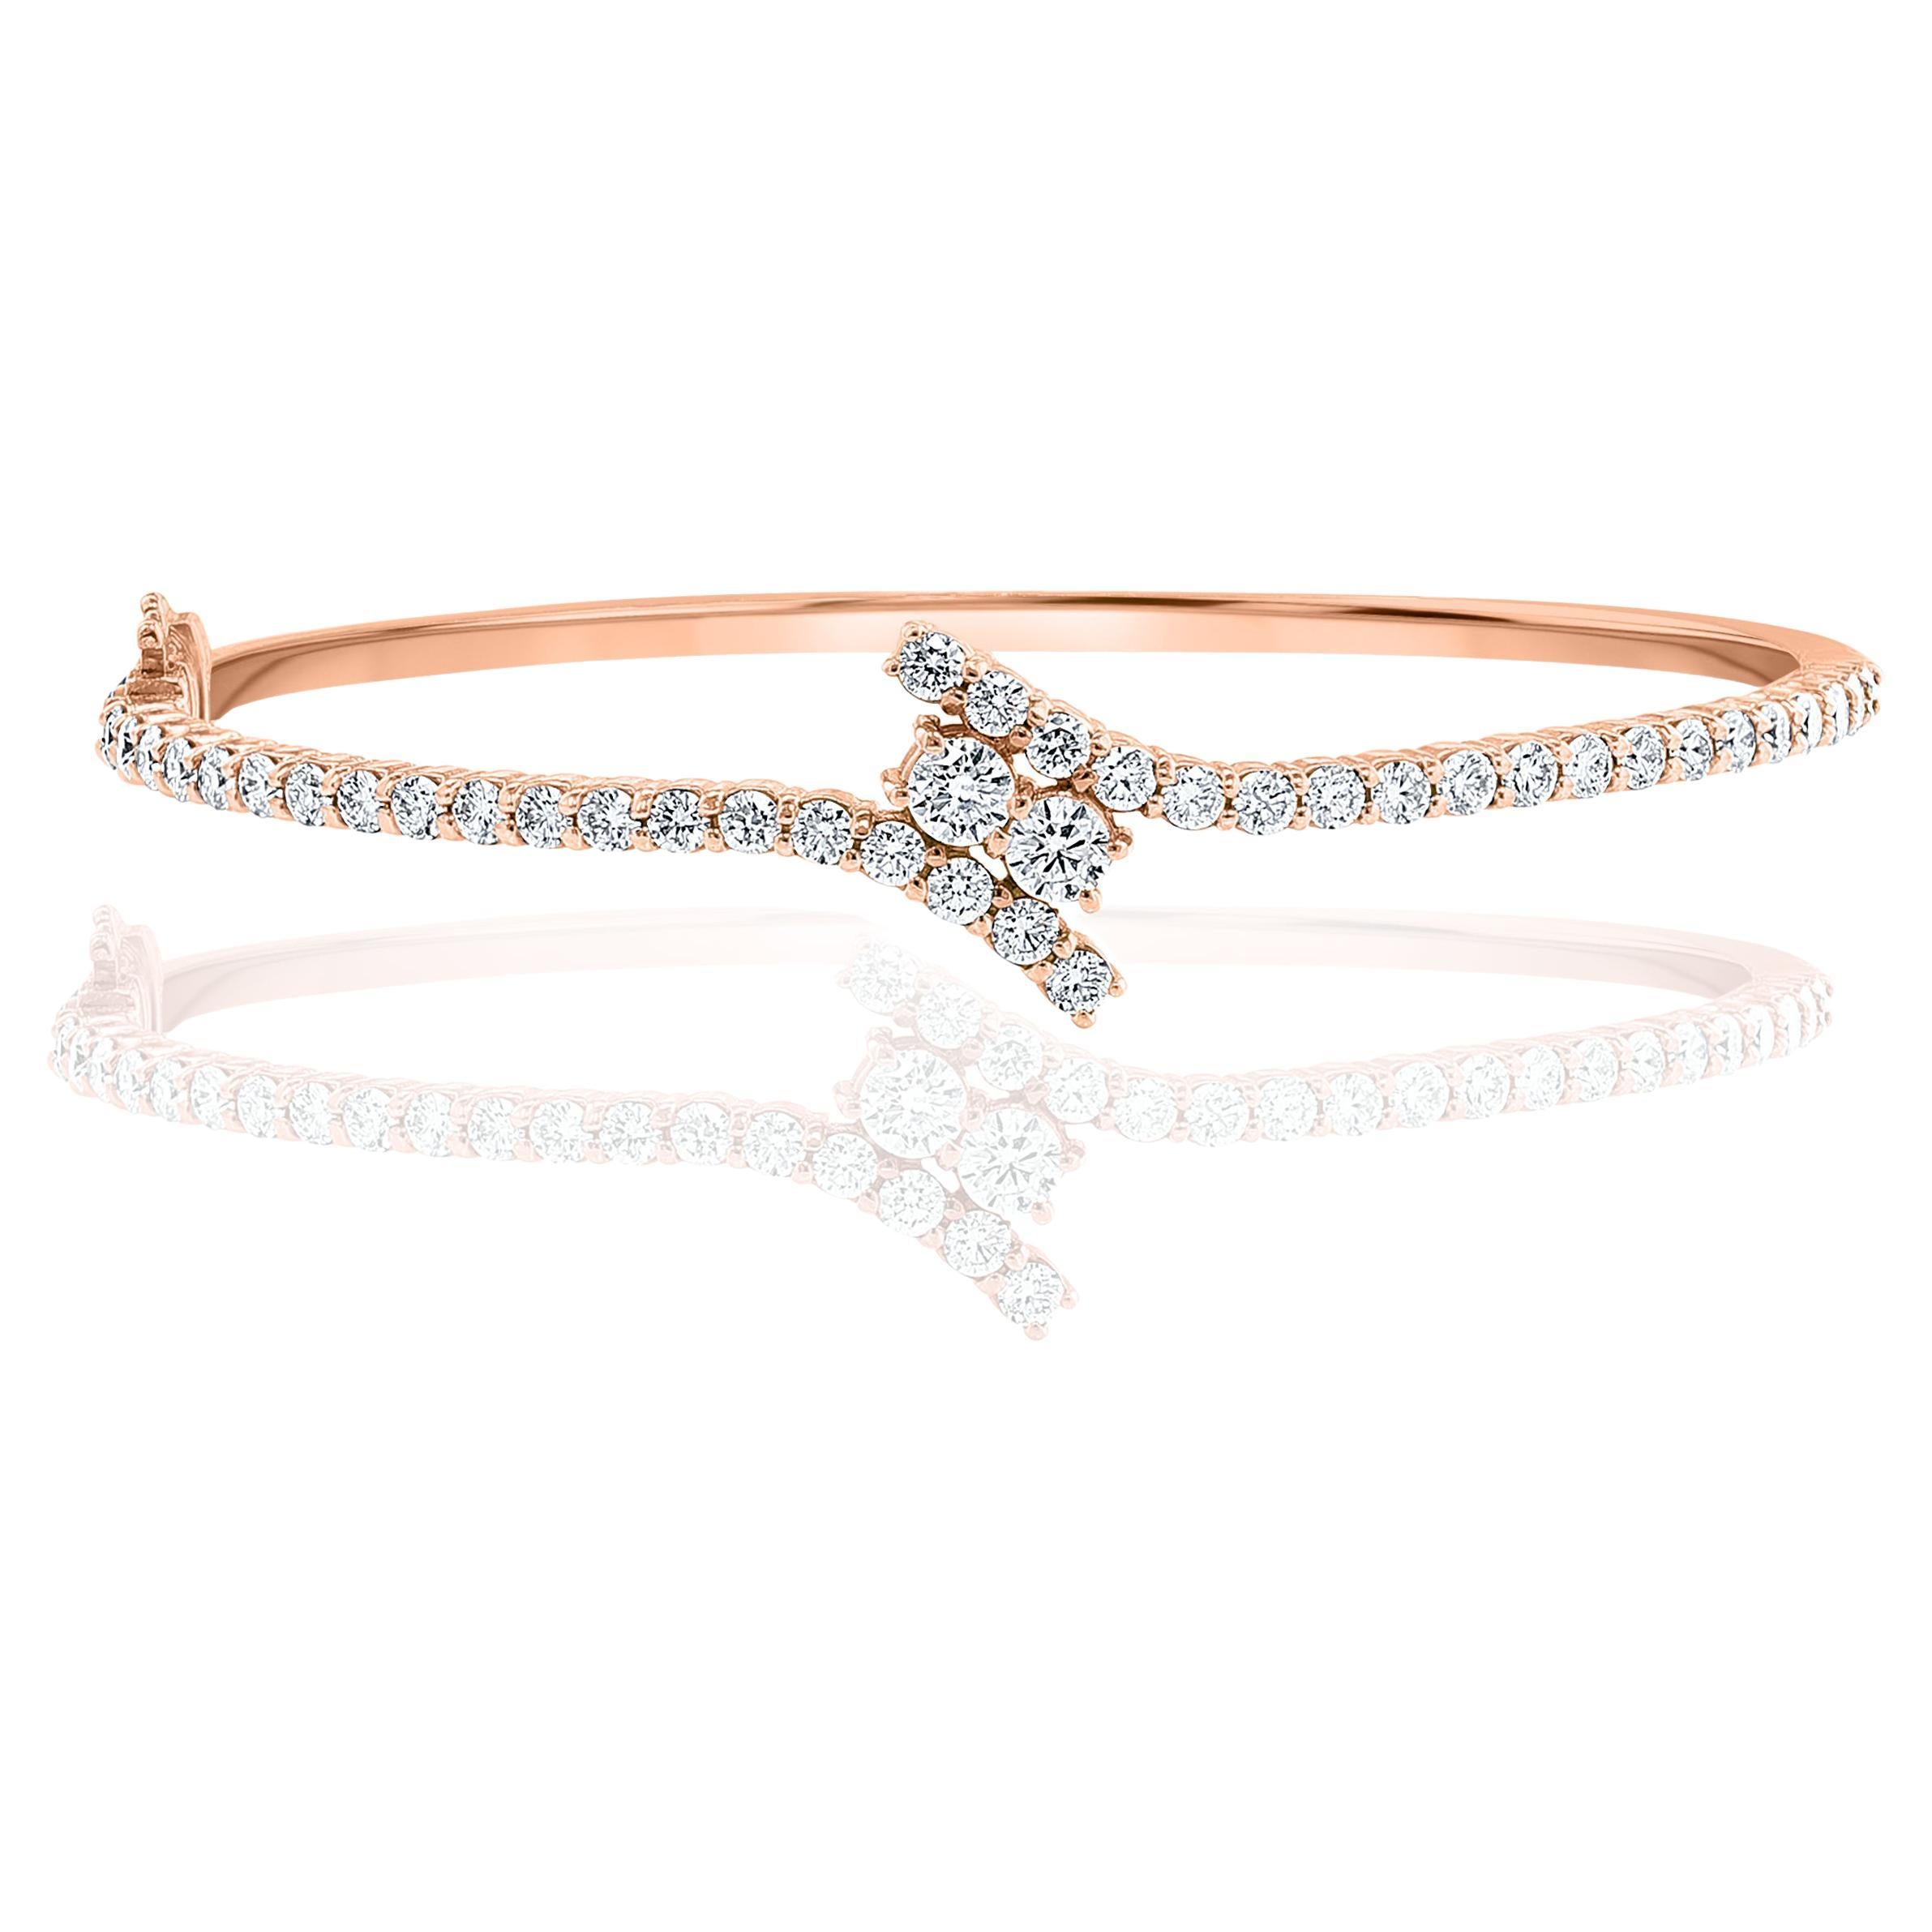 2.13 Carats Round Cut Diamond Twisted Bangle Bracelet in 14K Rose Gold For Sale